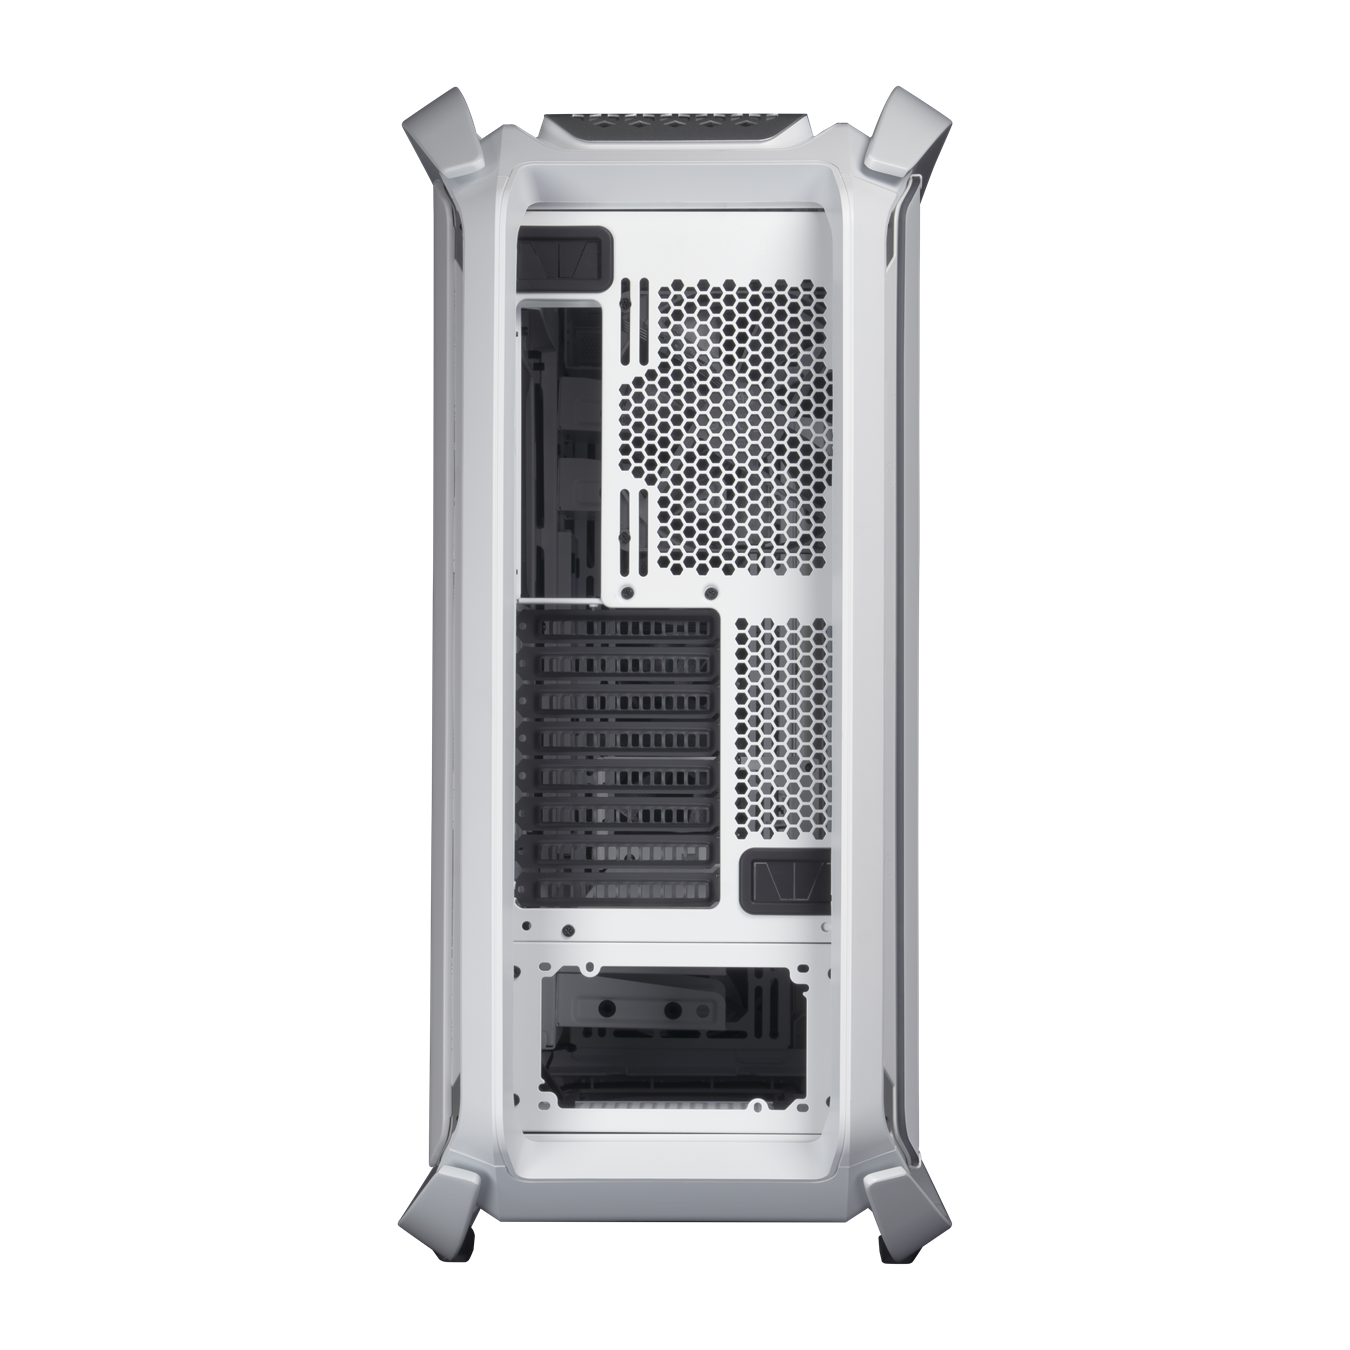 COSMOS C700M White - The unique frame design supports a conventional, chimney, inverse layout, or a fully customized layout. The motherboard tray is also removable for installation outside of the chassis.